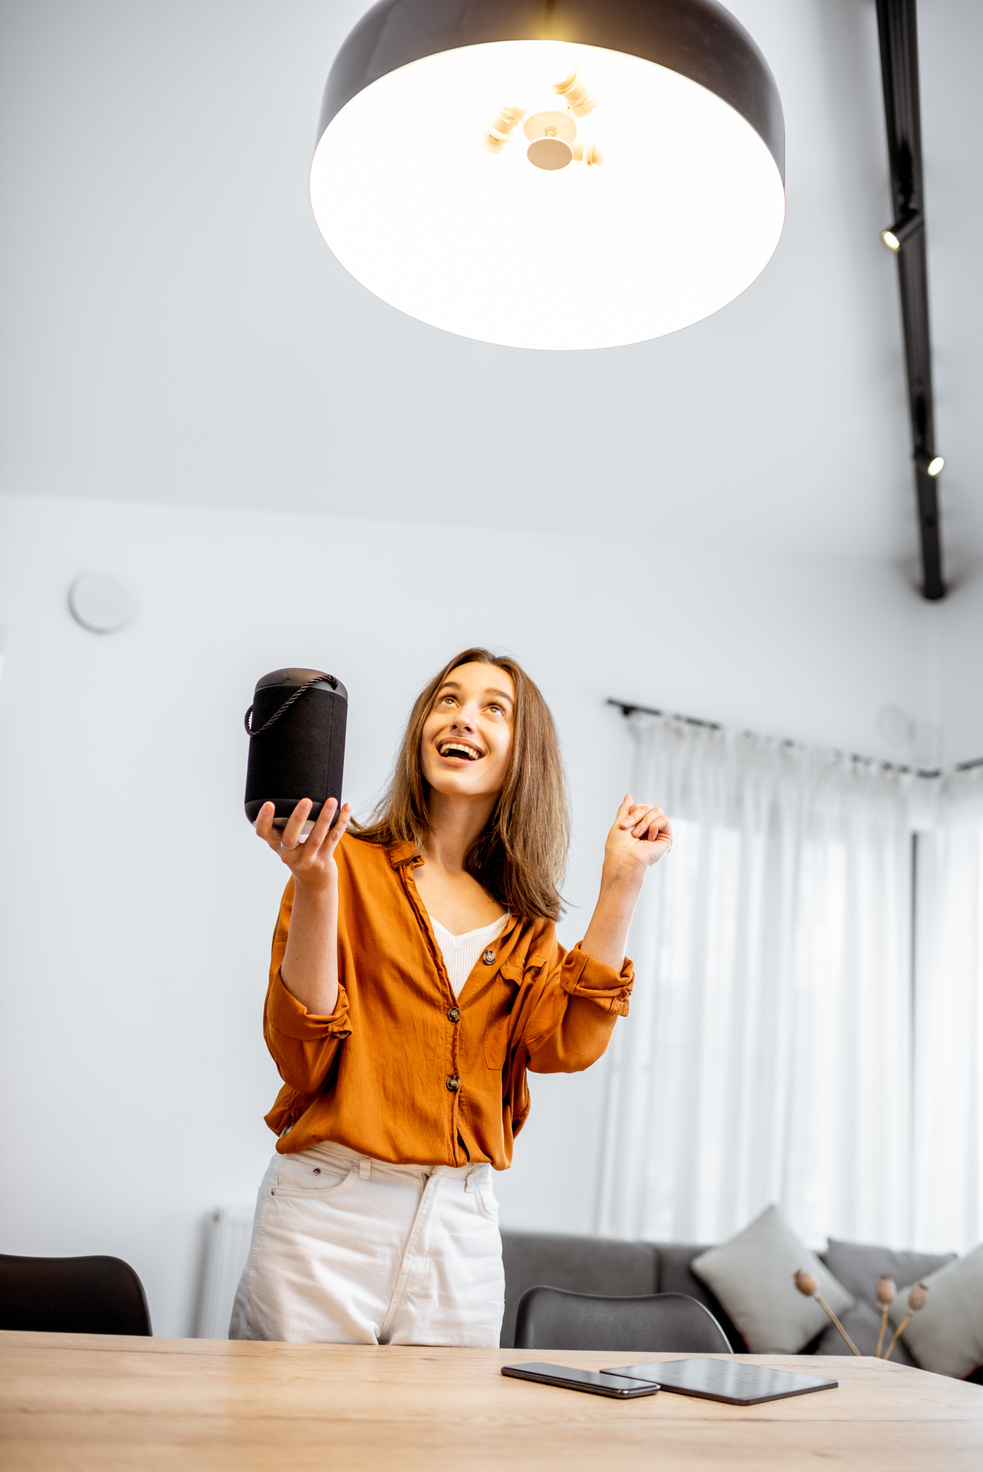 Woman controlling light with a smart speaker at home